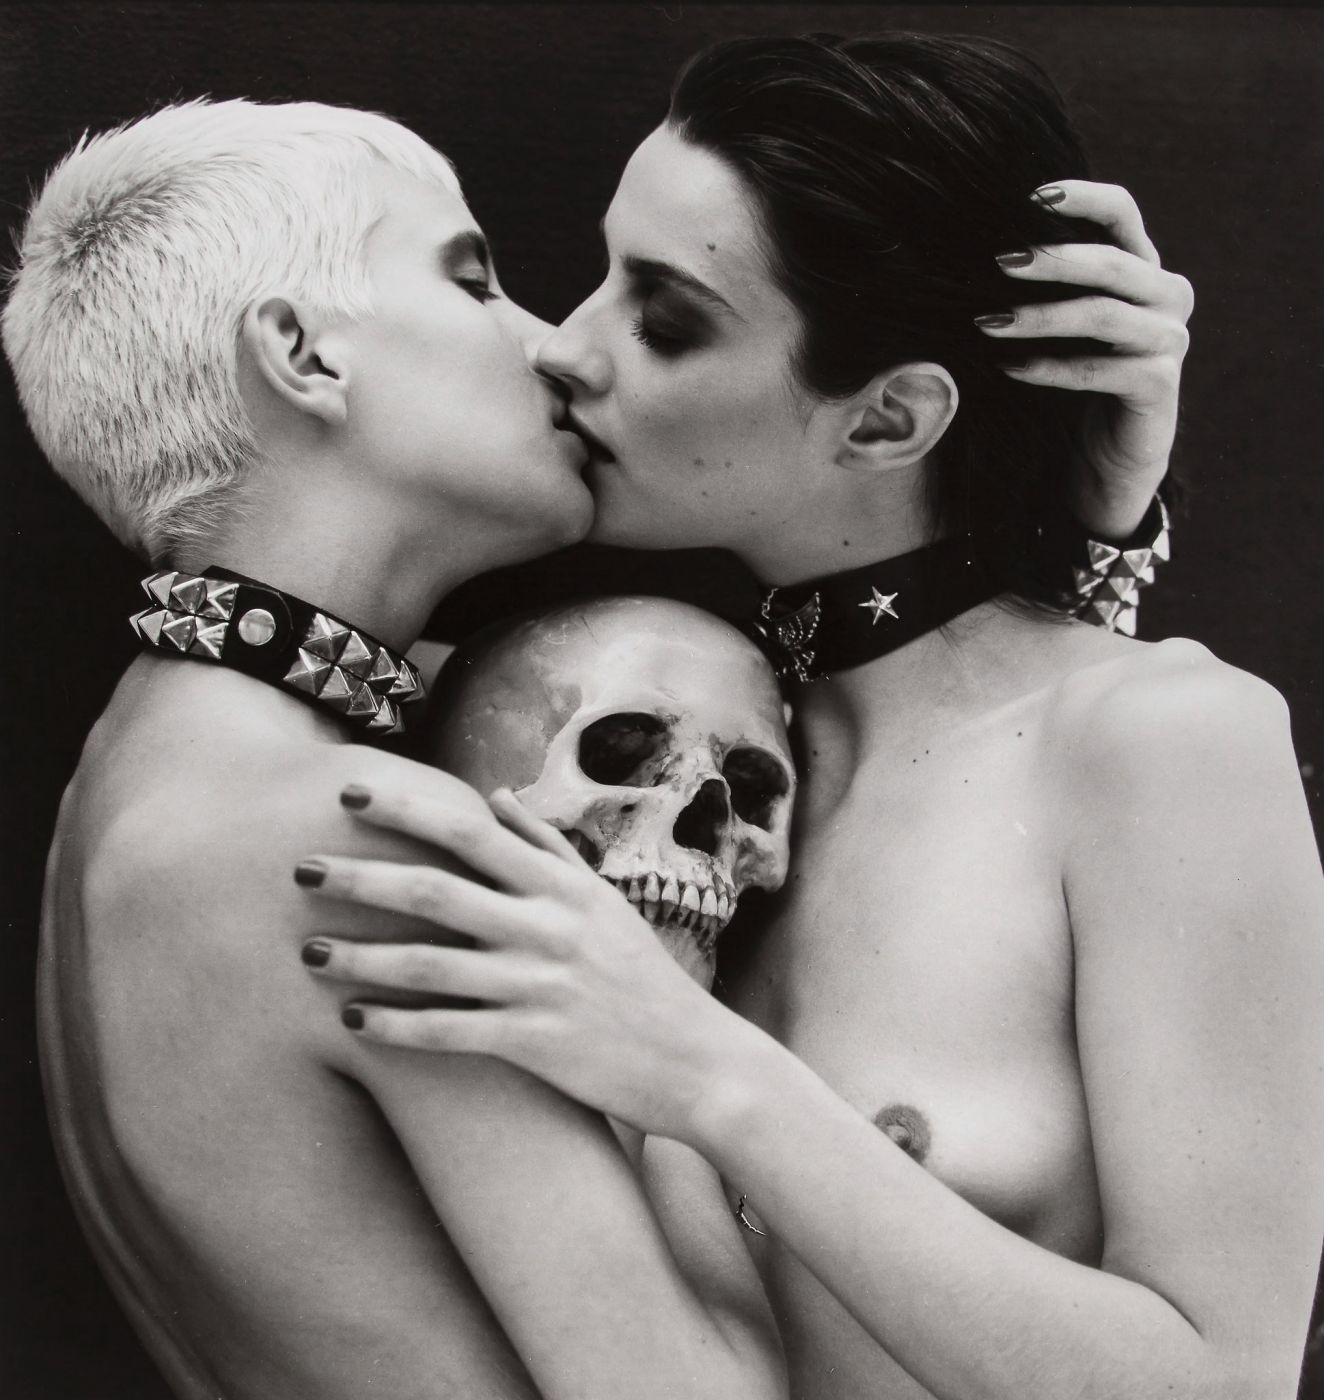 David Bailey, “Angie Hill and Catherine Bailey Kissing”, 1986